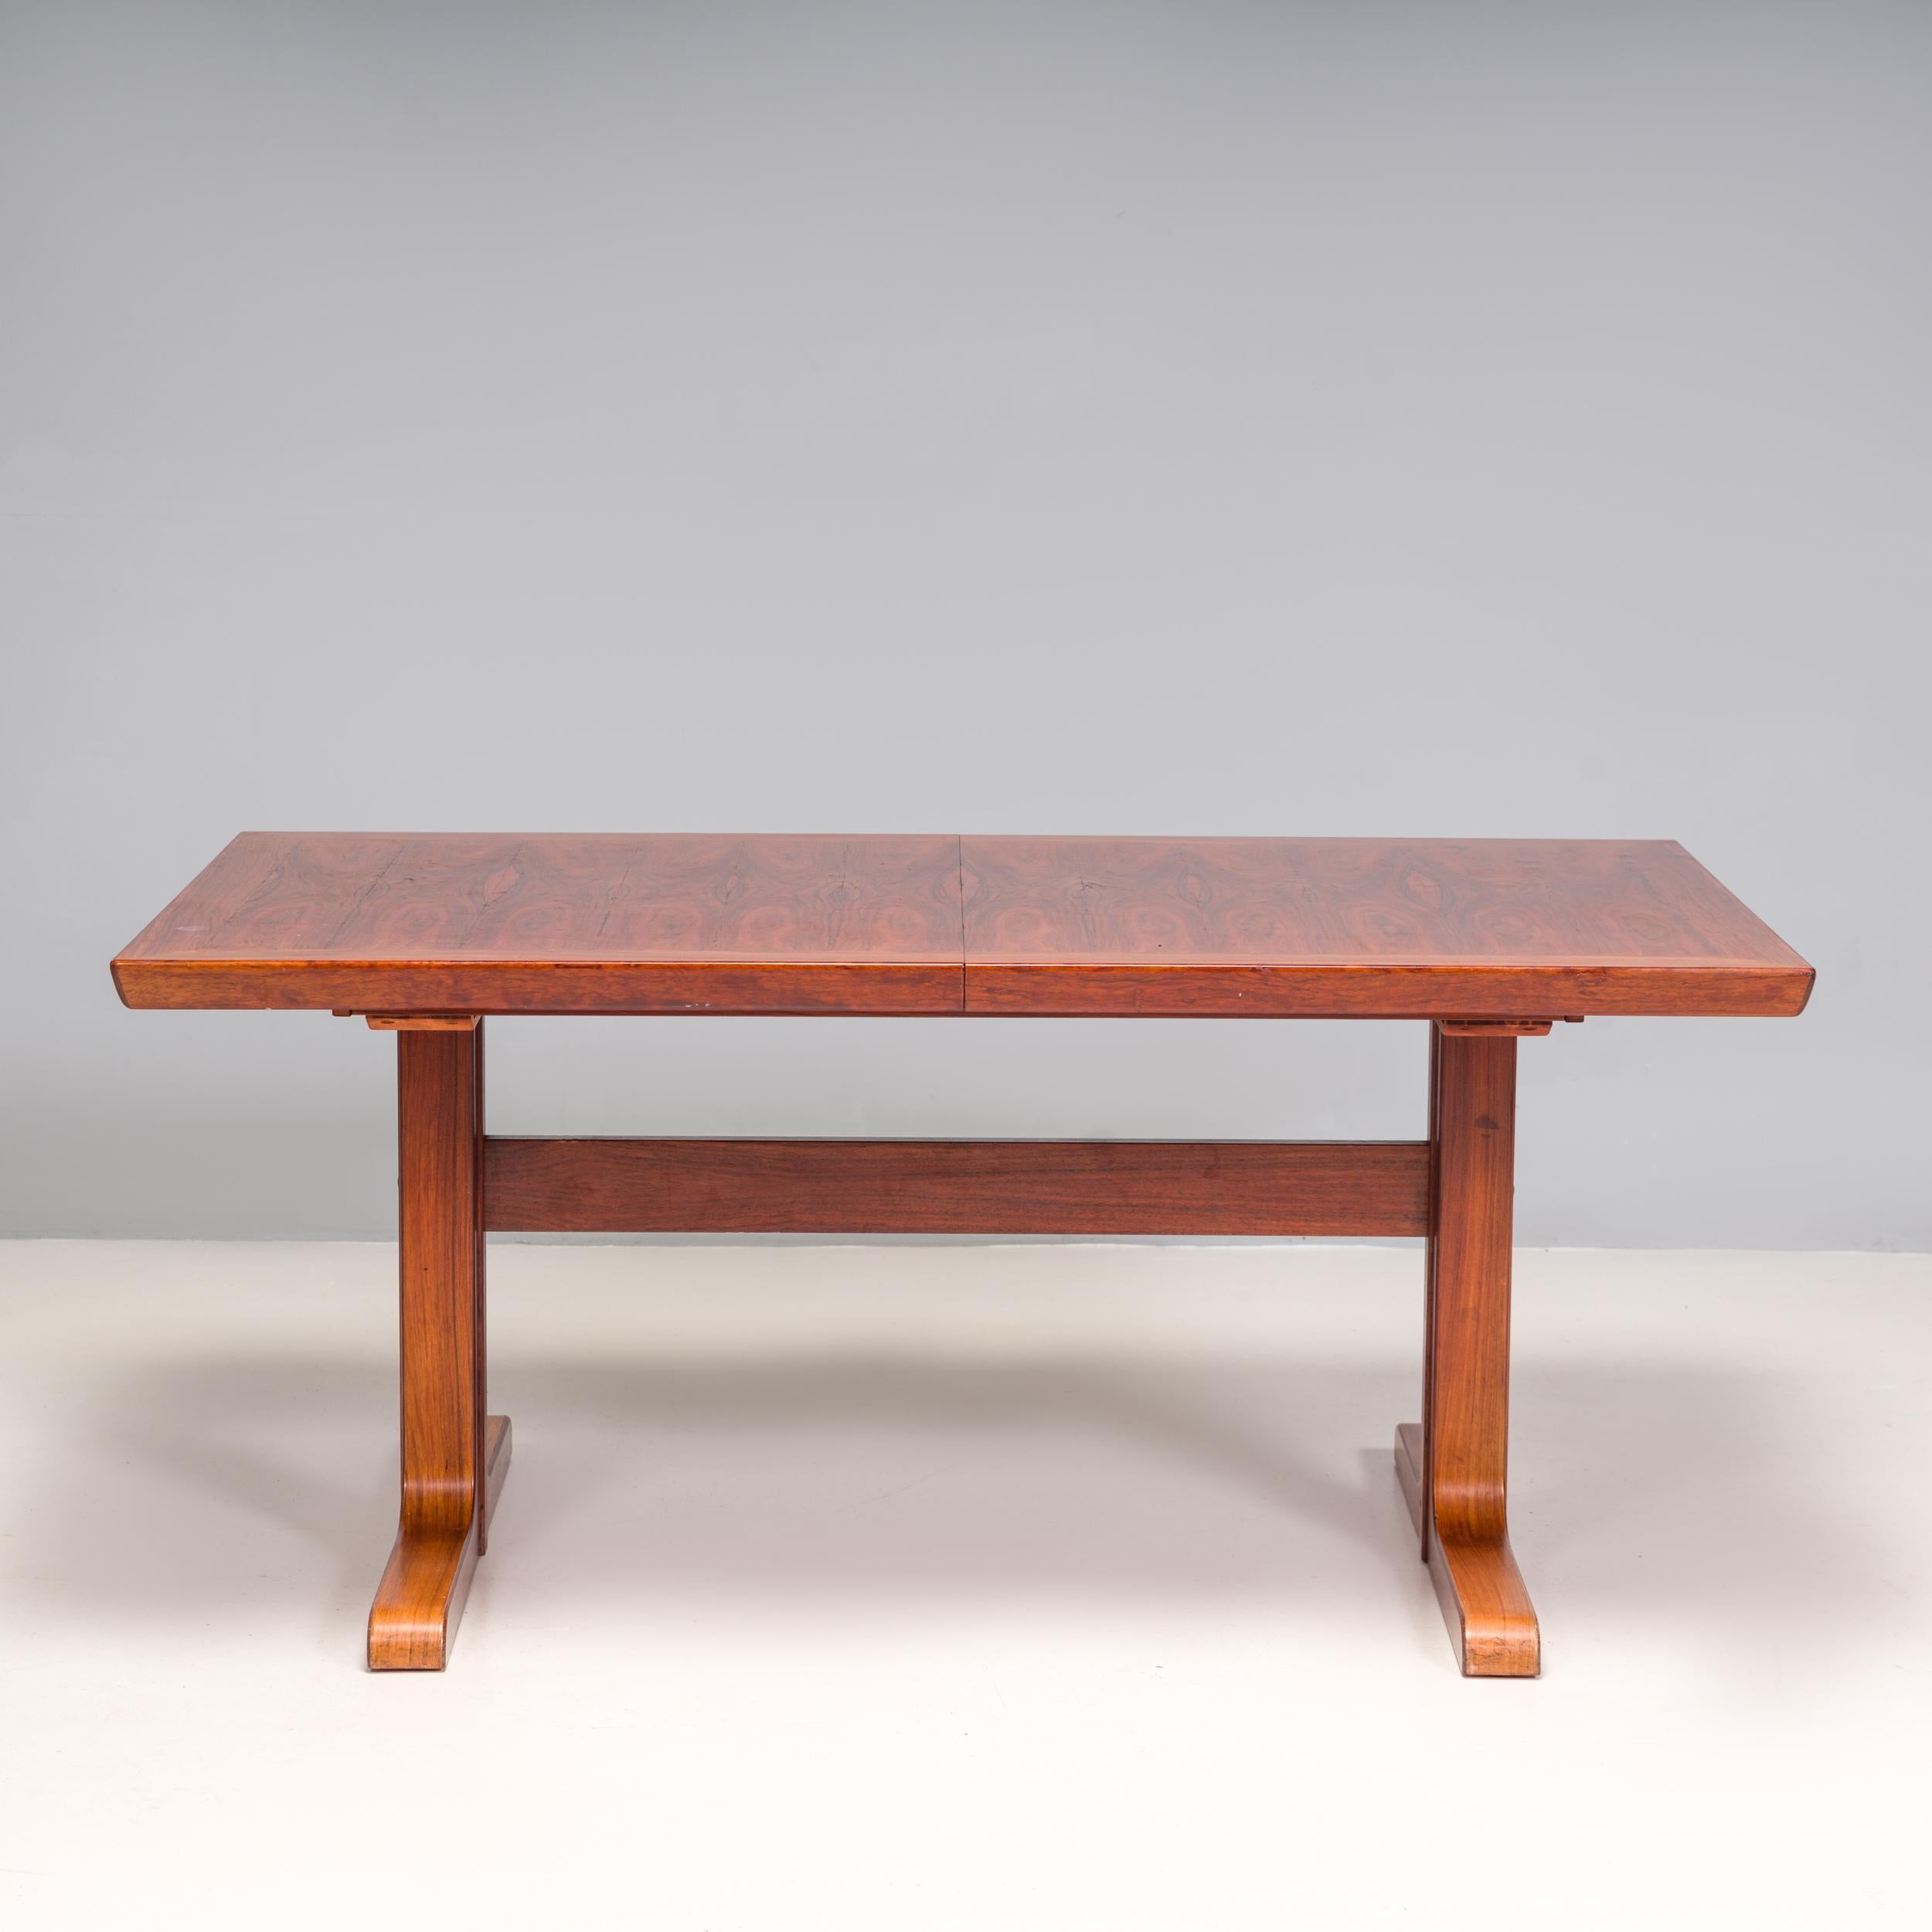 A fantastic example of Danish mid-century modern design, this extending dining table was made by renowned cabinet manufacturer Skovby Møbelfabrik between the 1960s and 1970s. 

Constructed from rosewood, the dining table has a large rectangular